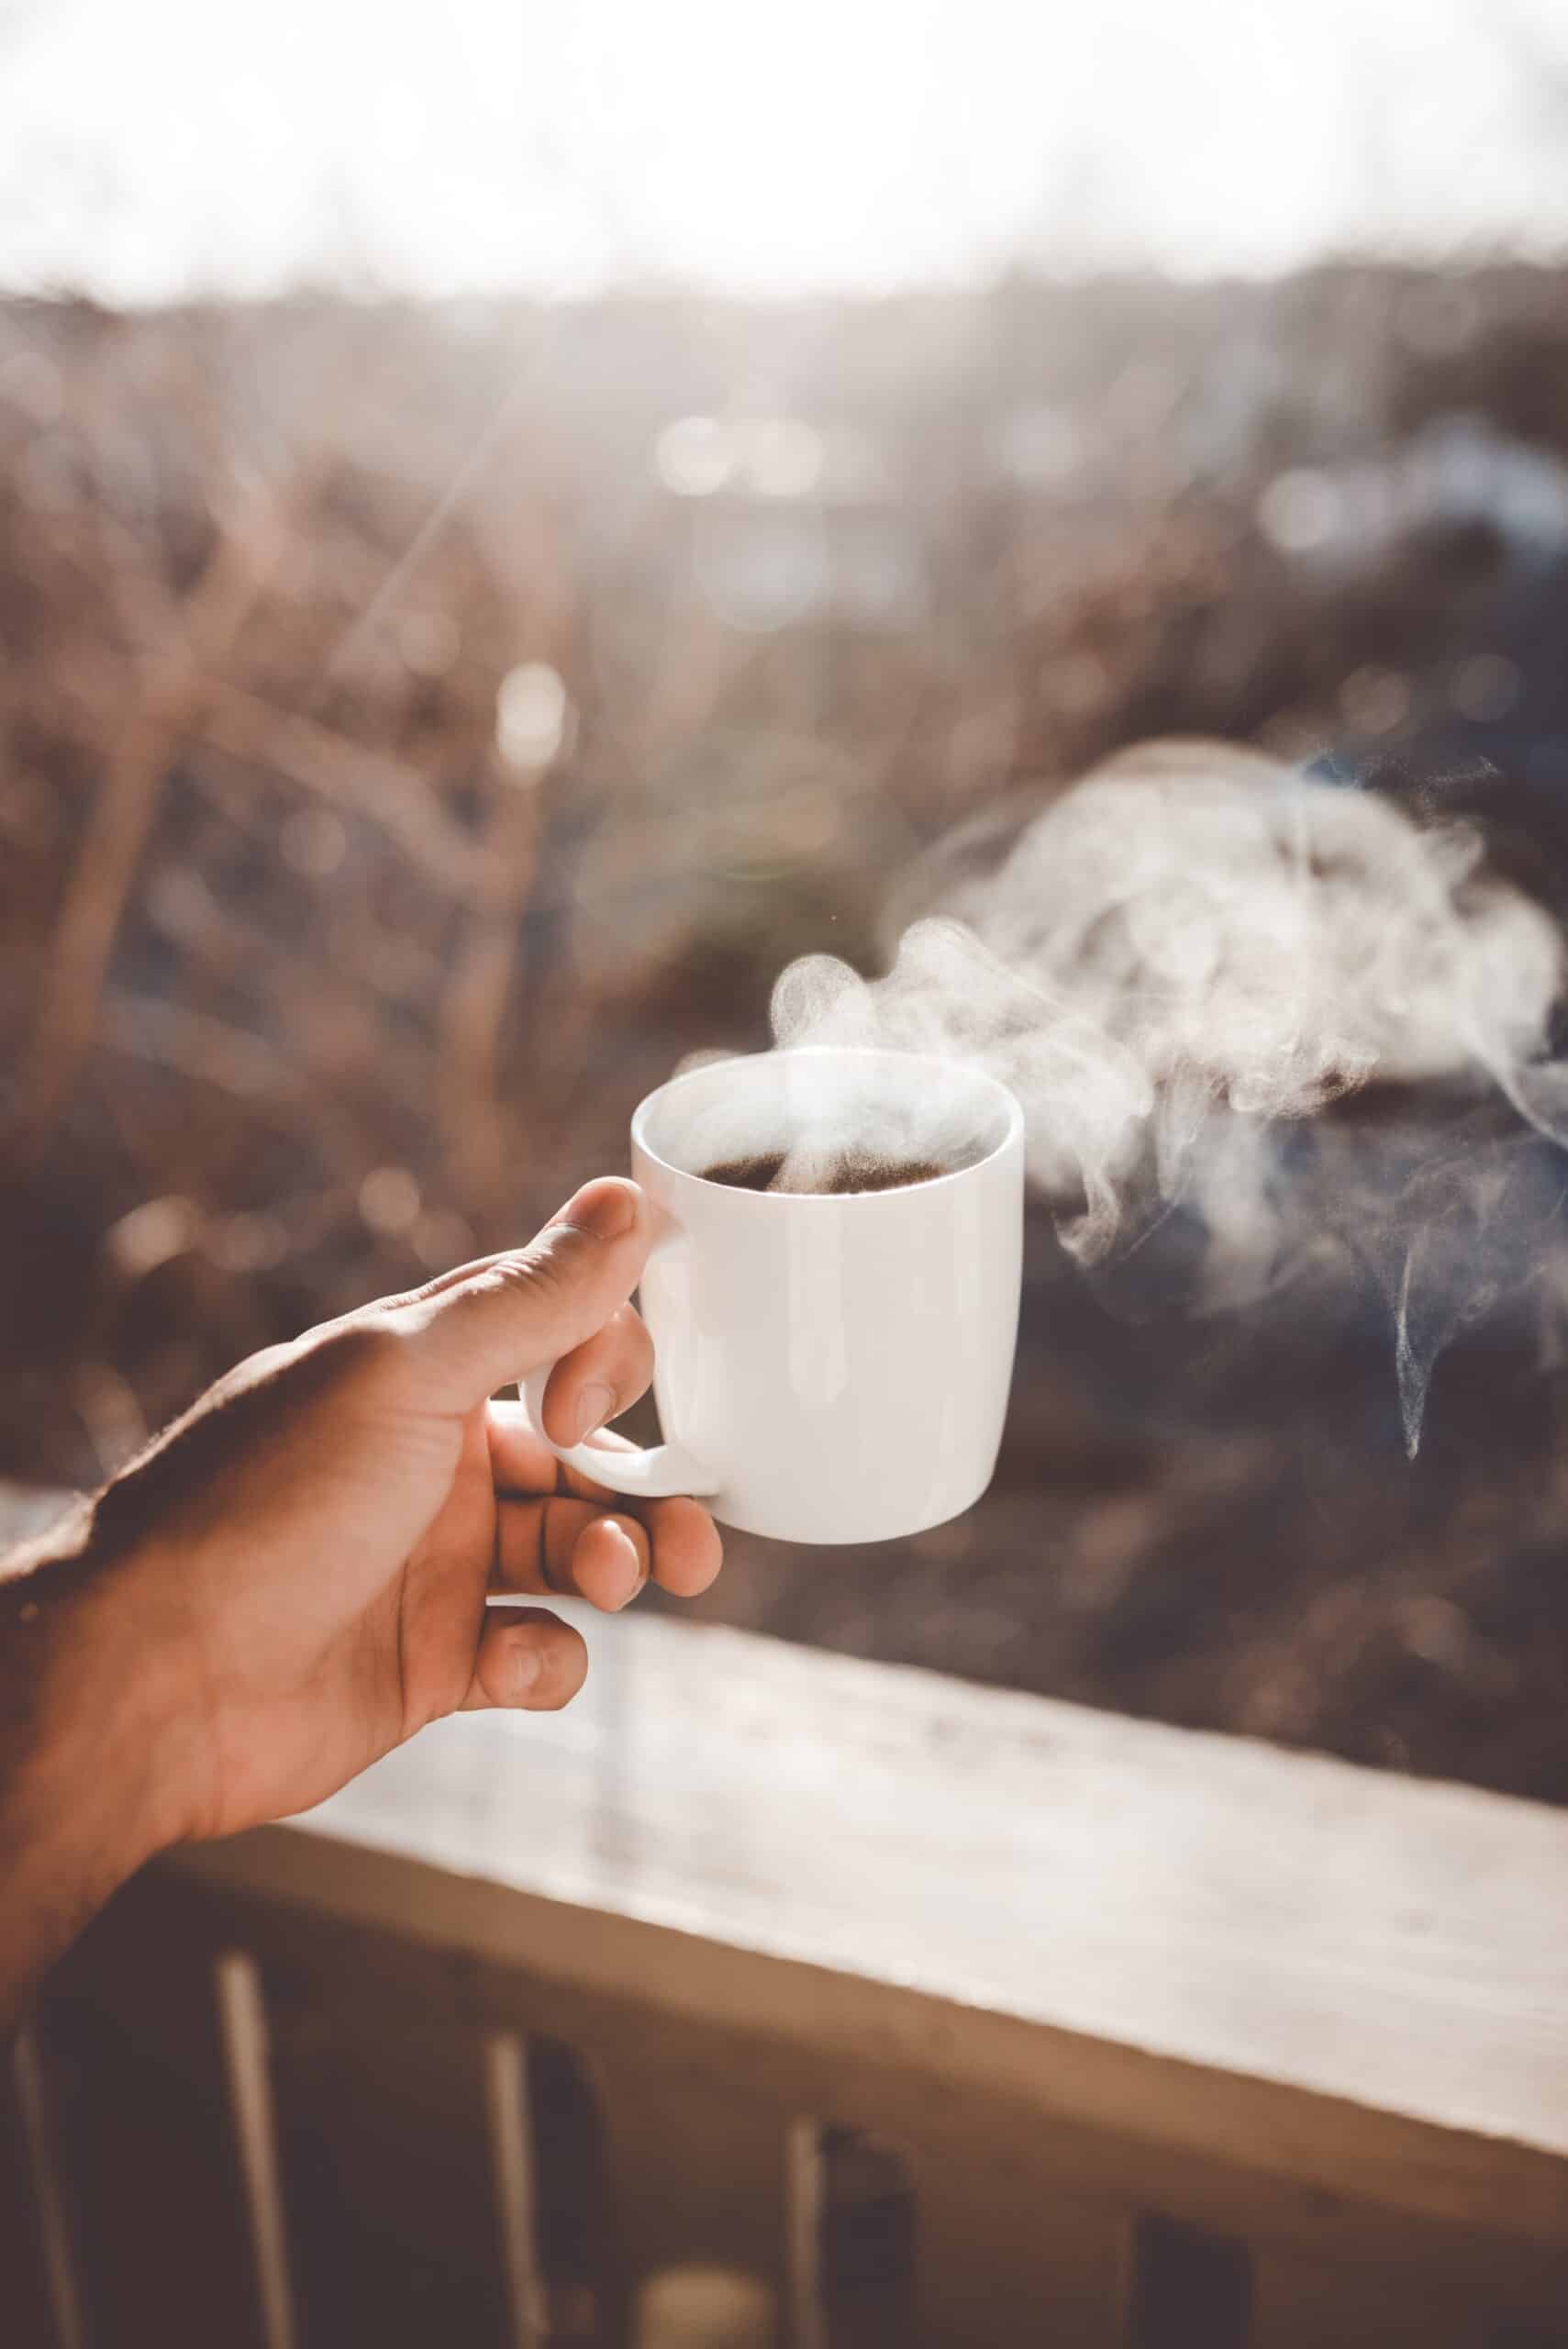 Coffee and Ulcerative Colitis - do they belong together? A hand holding a cup of steaming coffee on a deck